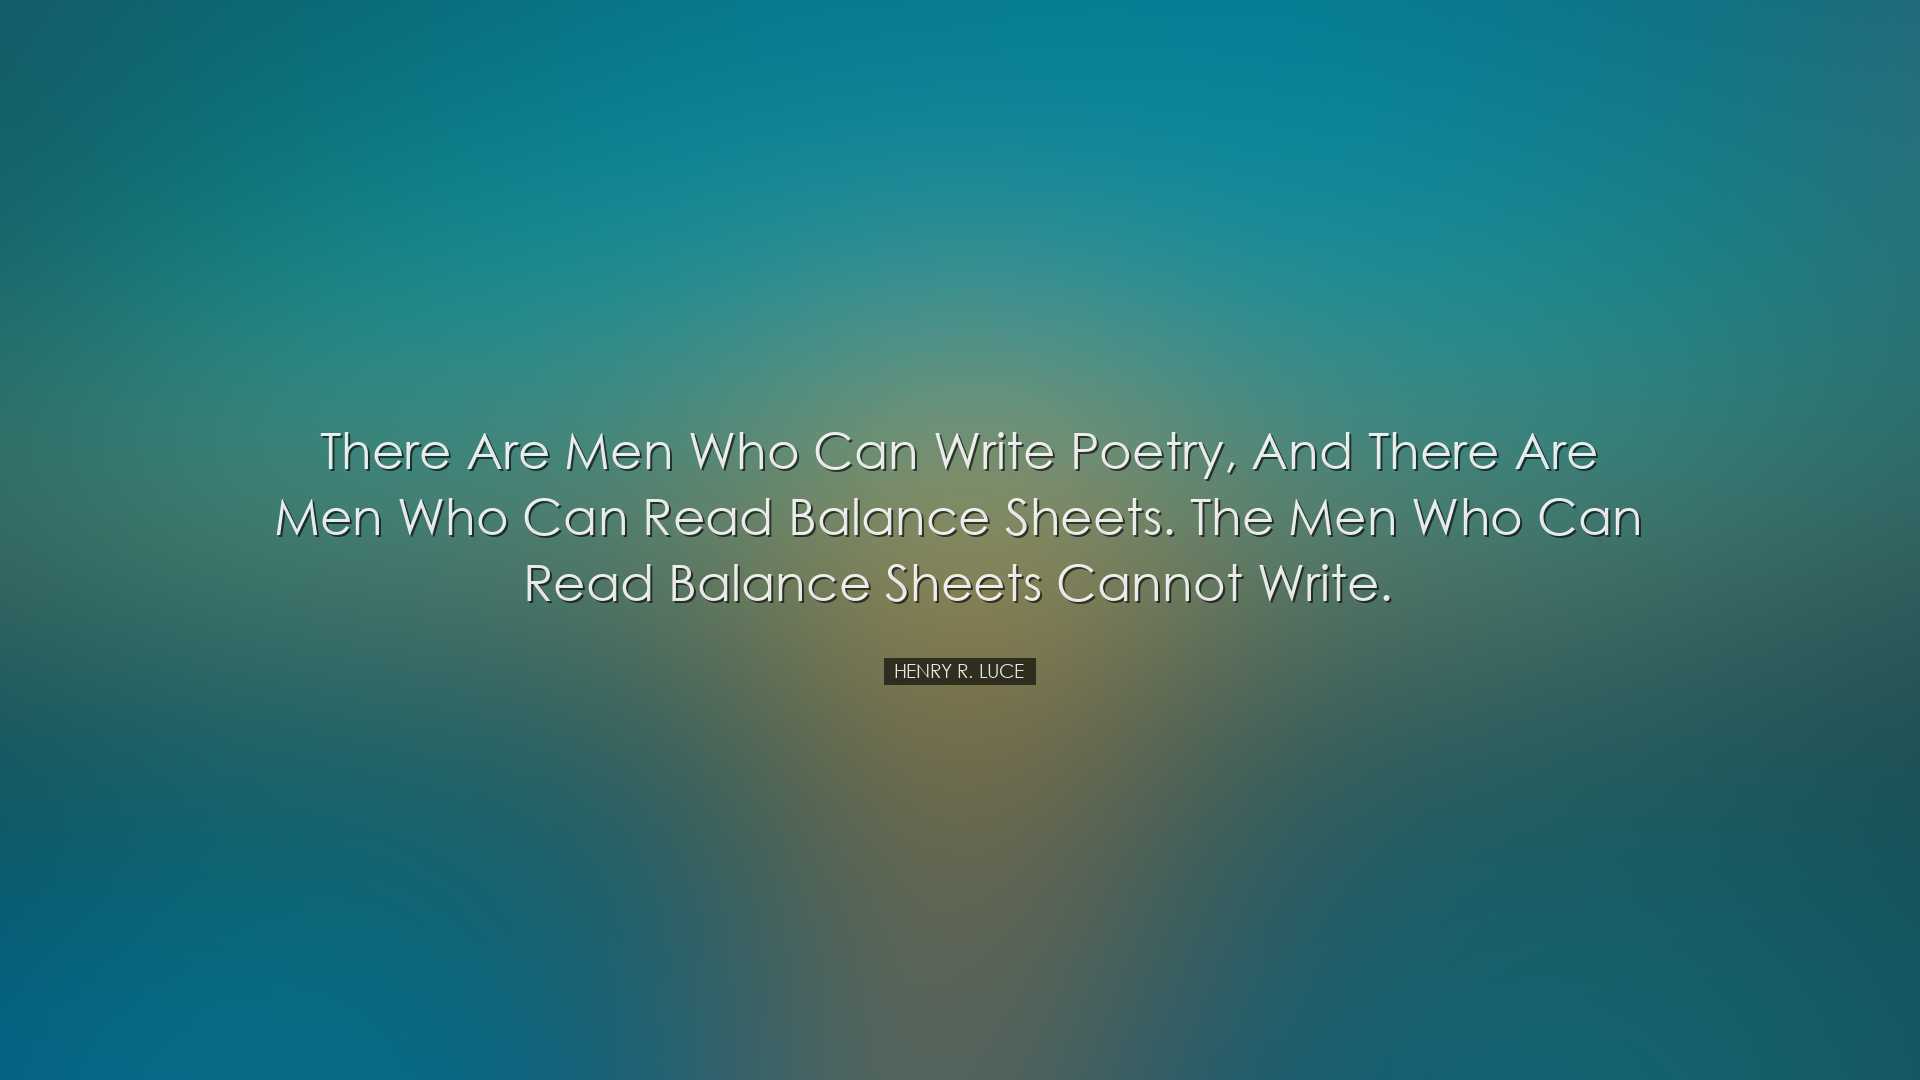 There are men who can write poetry, and there are men who can read